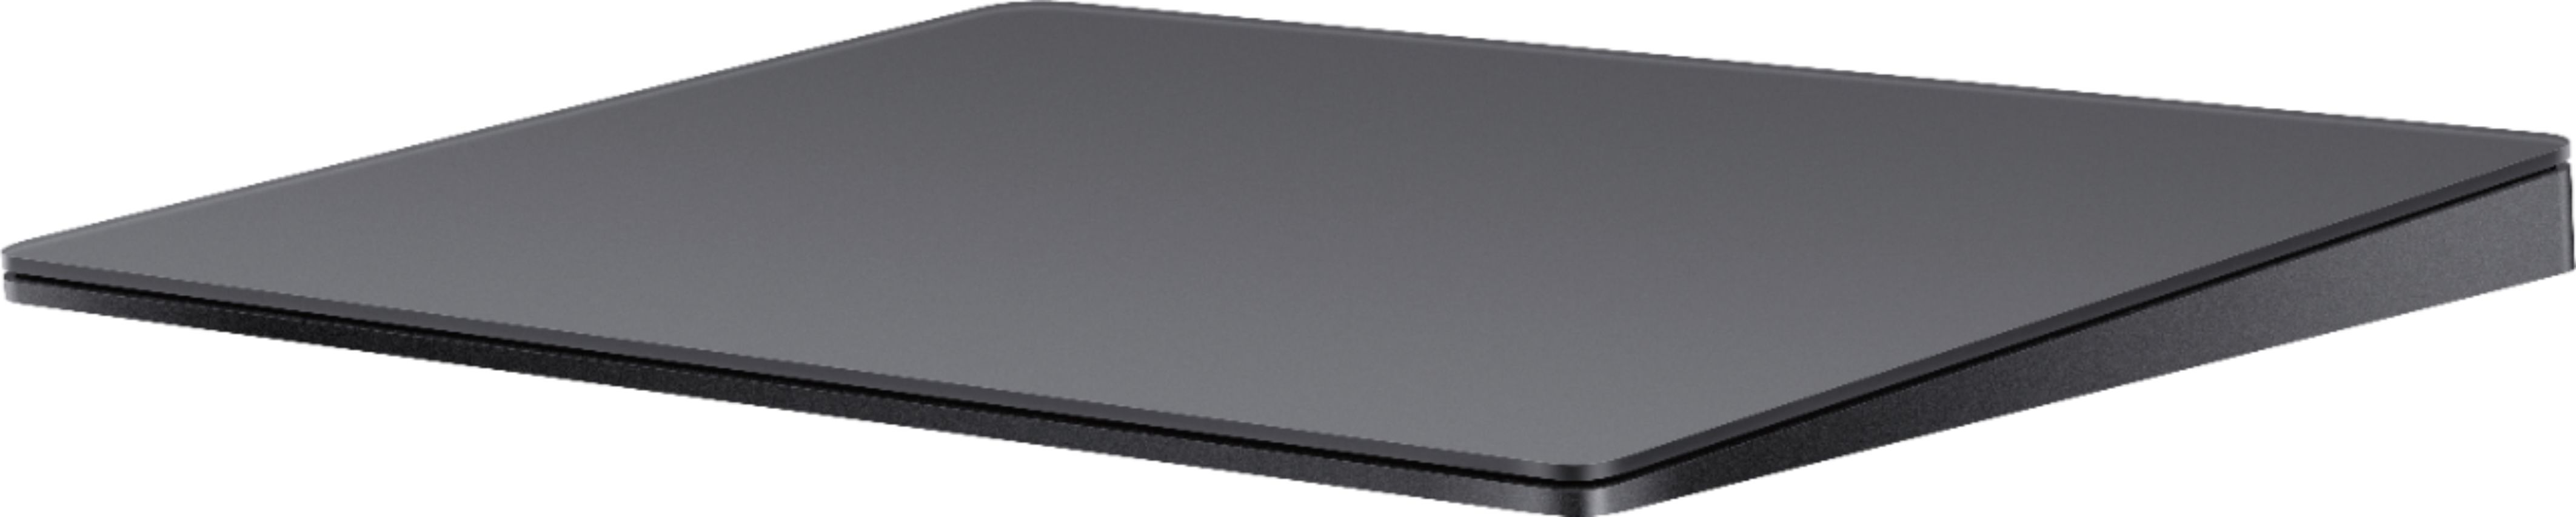 PC/タブレット PC周辺機器 Best Buy: Apple Magic Trackpad 2 Space Gray MRMF2LL/A